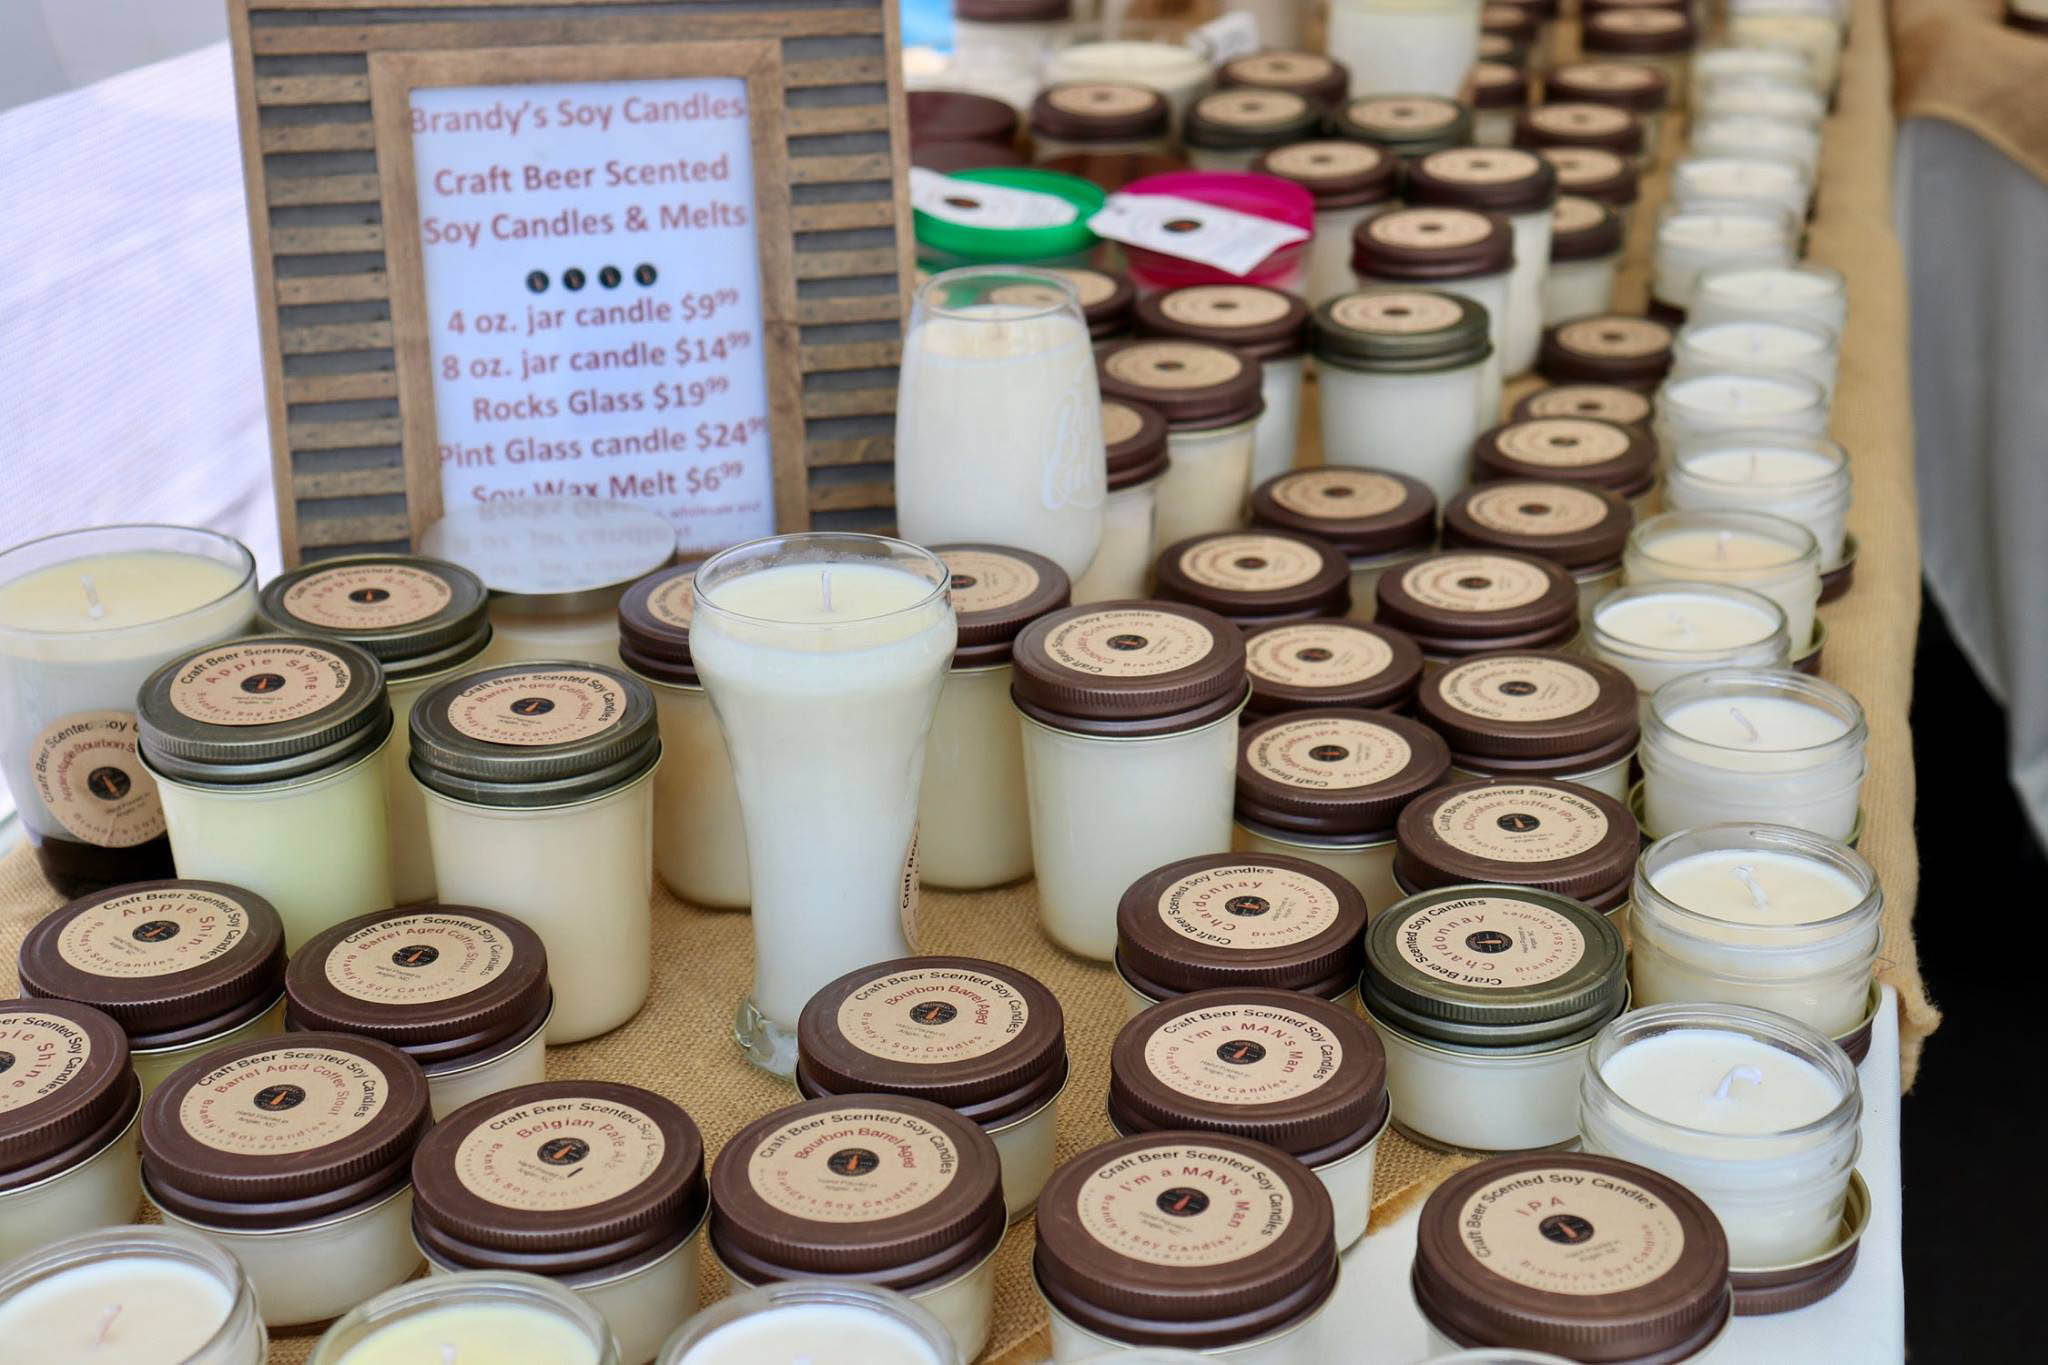 Candle maker sparks new flame in market, assisted by CCCC Small Business Center